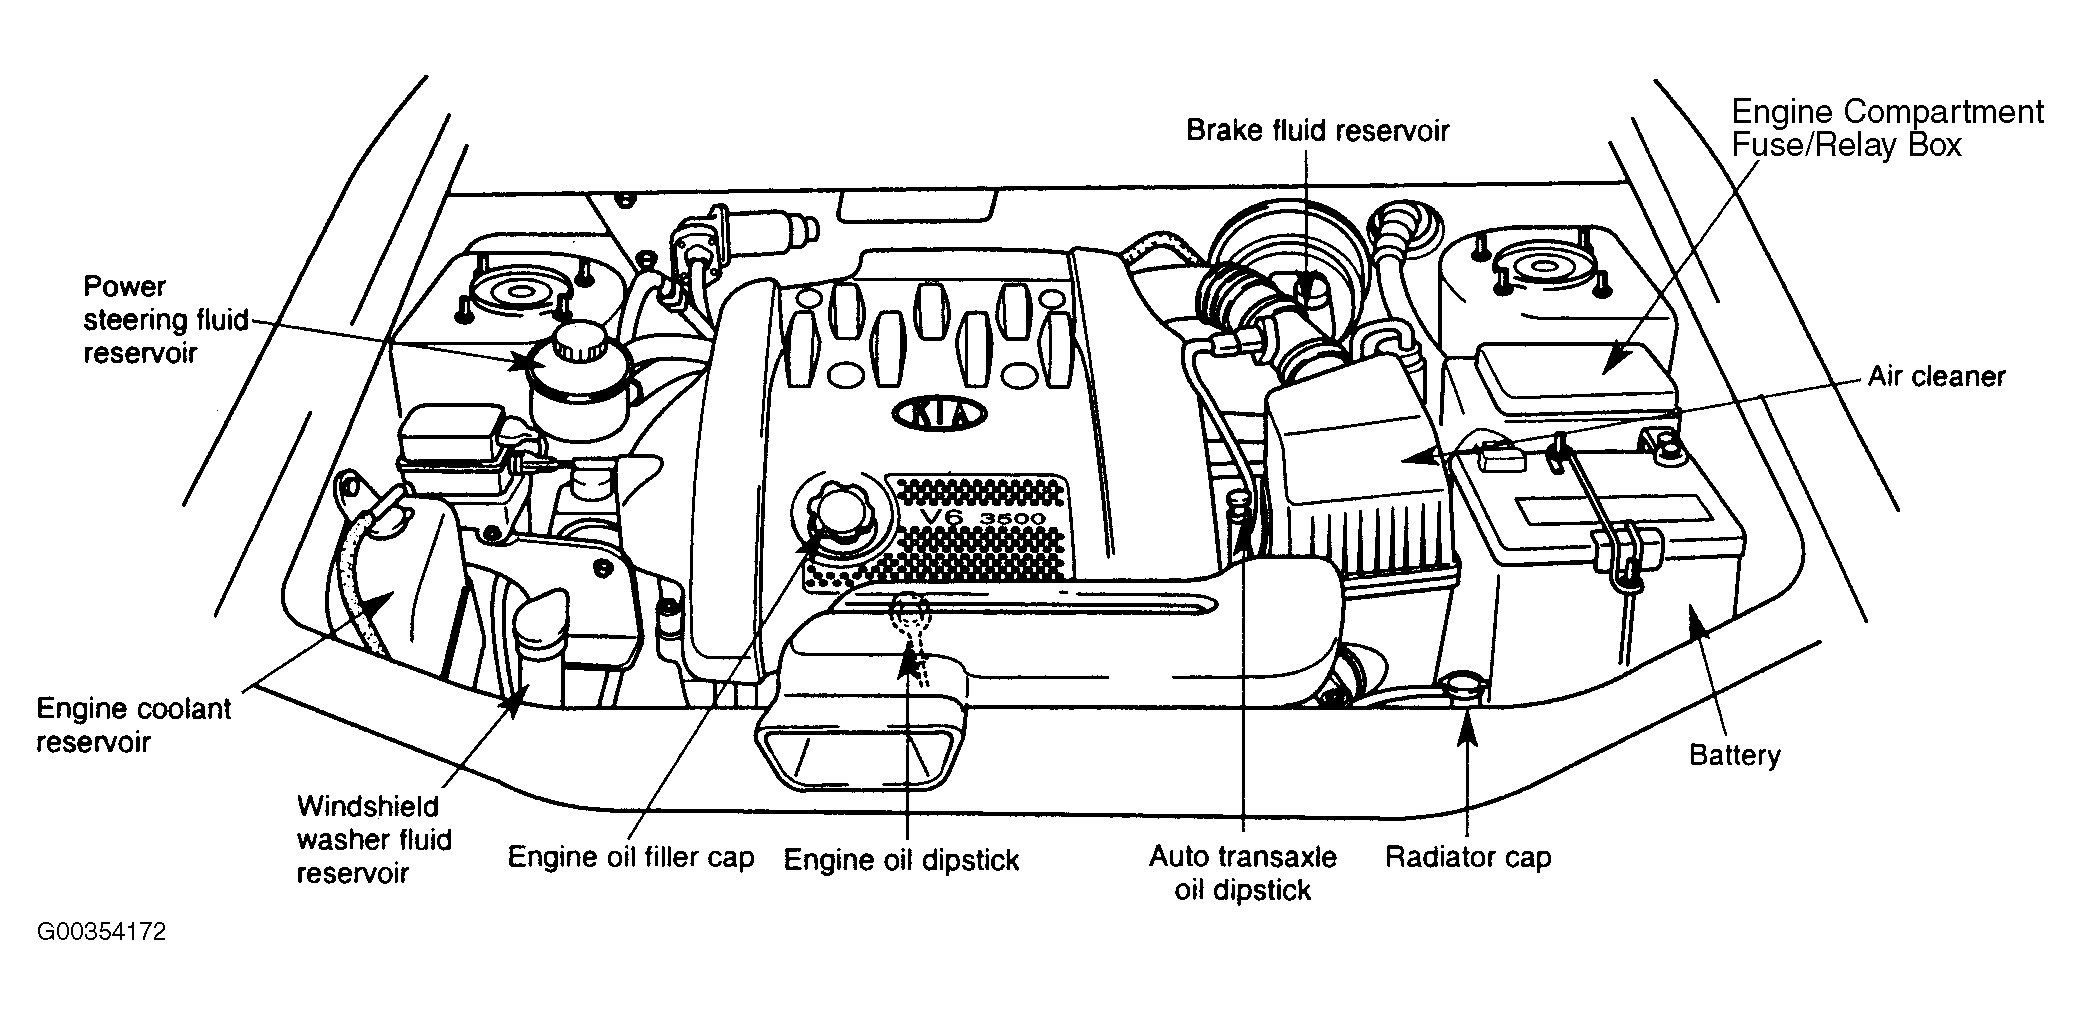 2002 Kia Spectra Engine Diagram Radio and Instrument Cluster Lights Stopped Working On My 2002 Kia